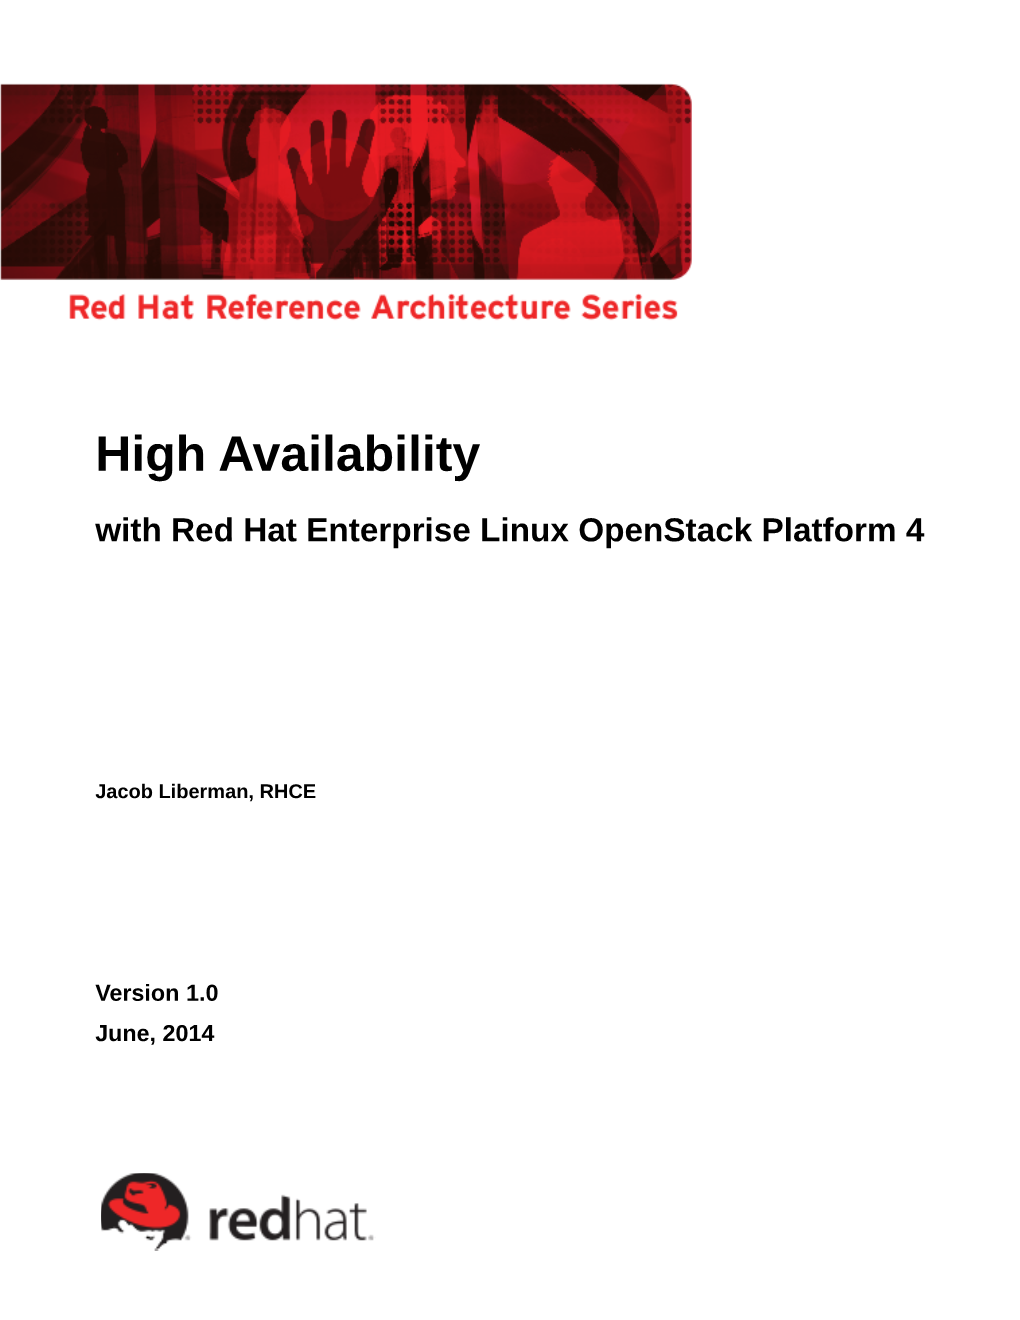 High Availability with Red Hat Enterprise Linux Openstack Platform 4